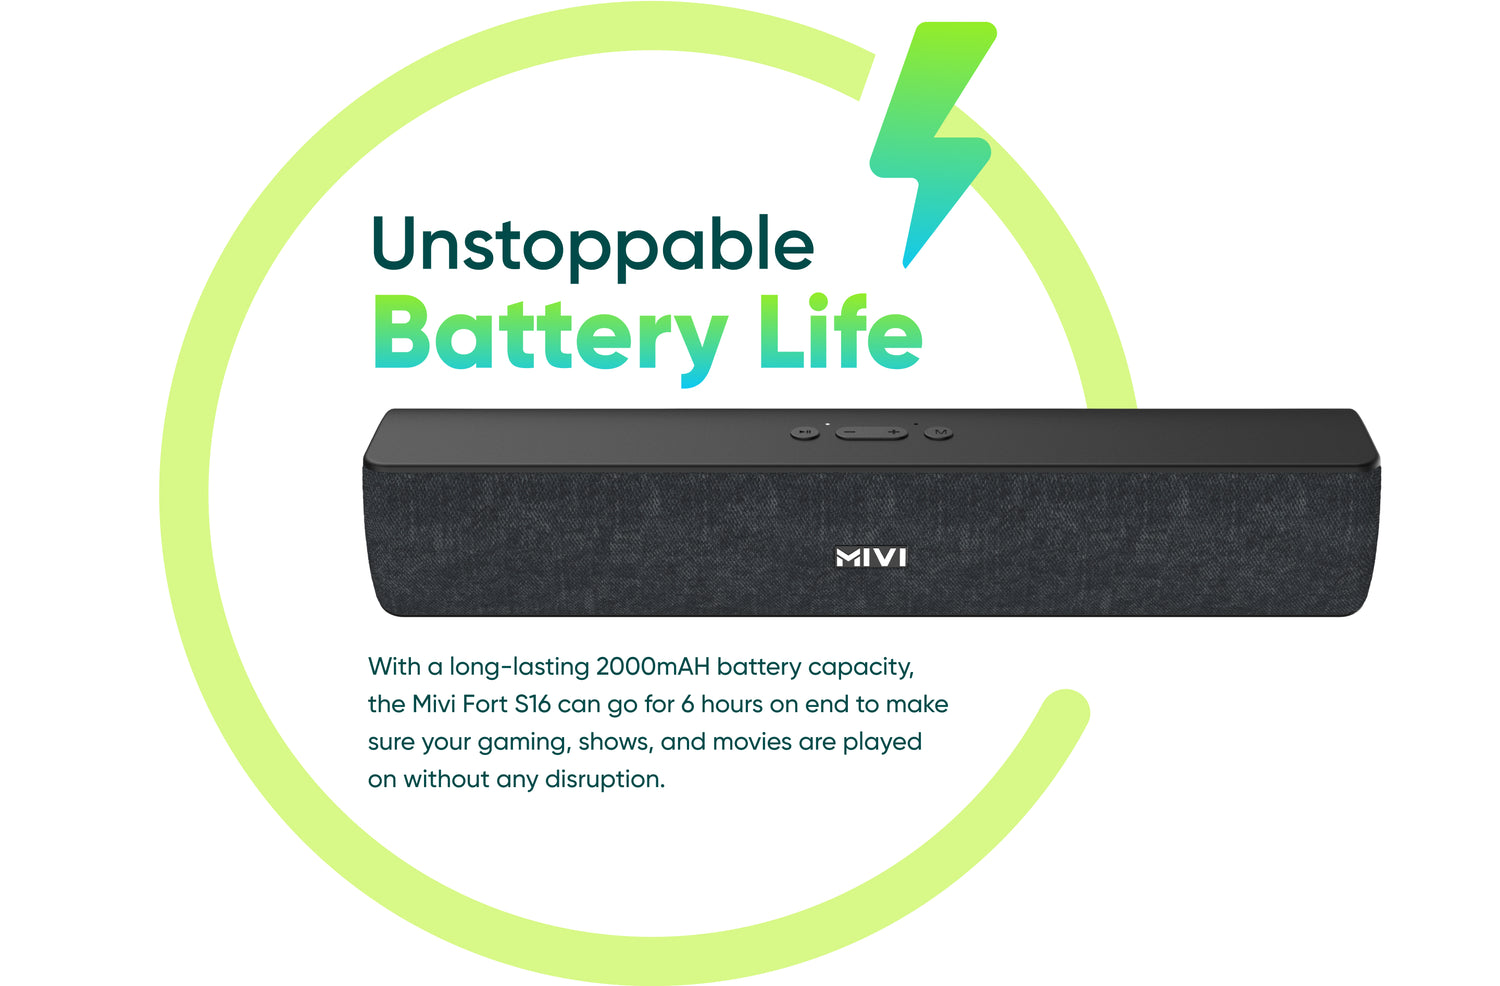 Unstoppable Battery Life With a long-lasting 2000mAH battery capacity, the Mivi Fort S16 can go for 6 hours on end to make sure your gaming, shows, and movies are played on without any disruption.